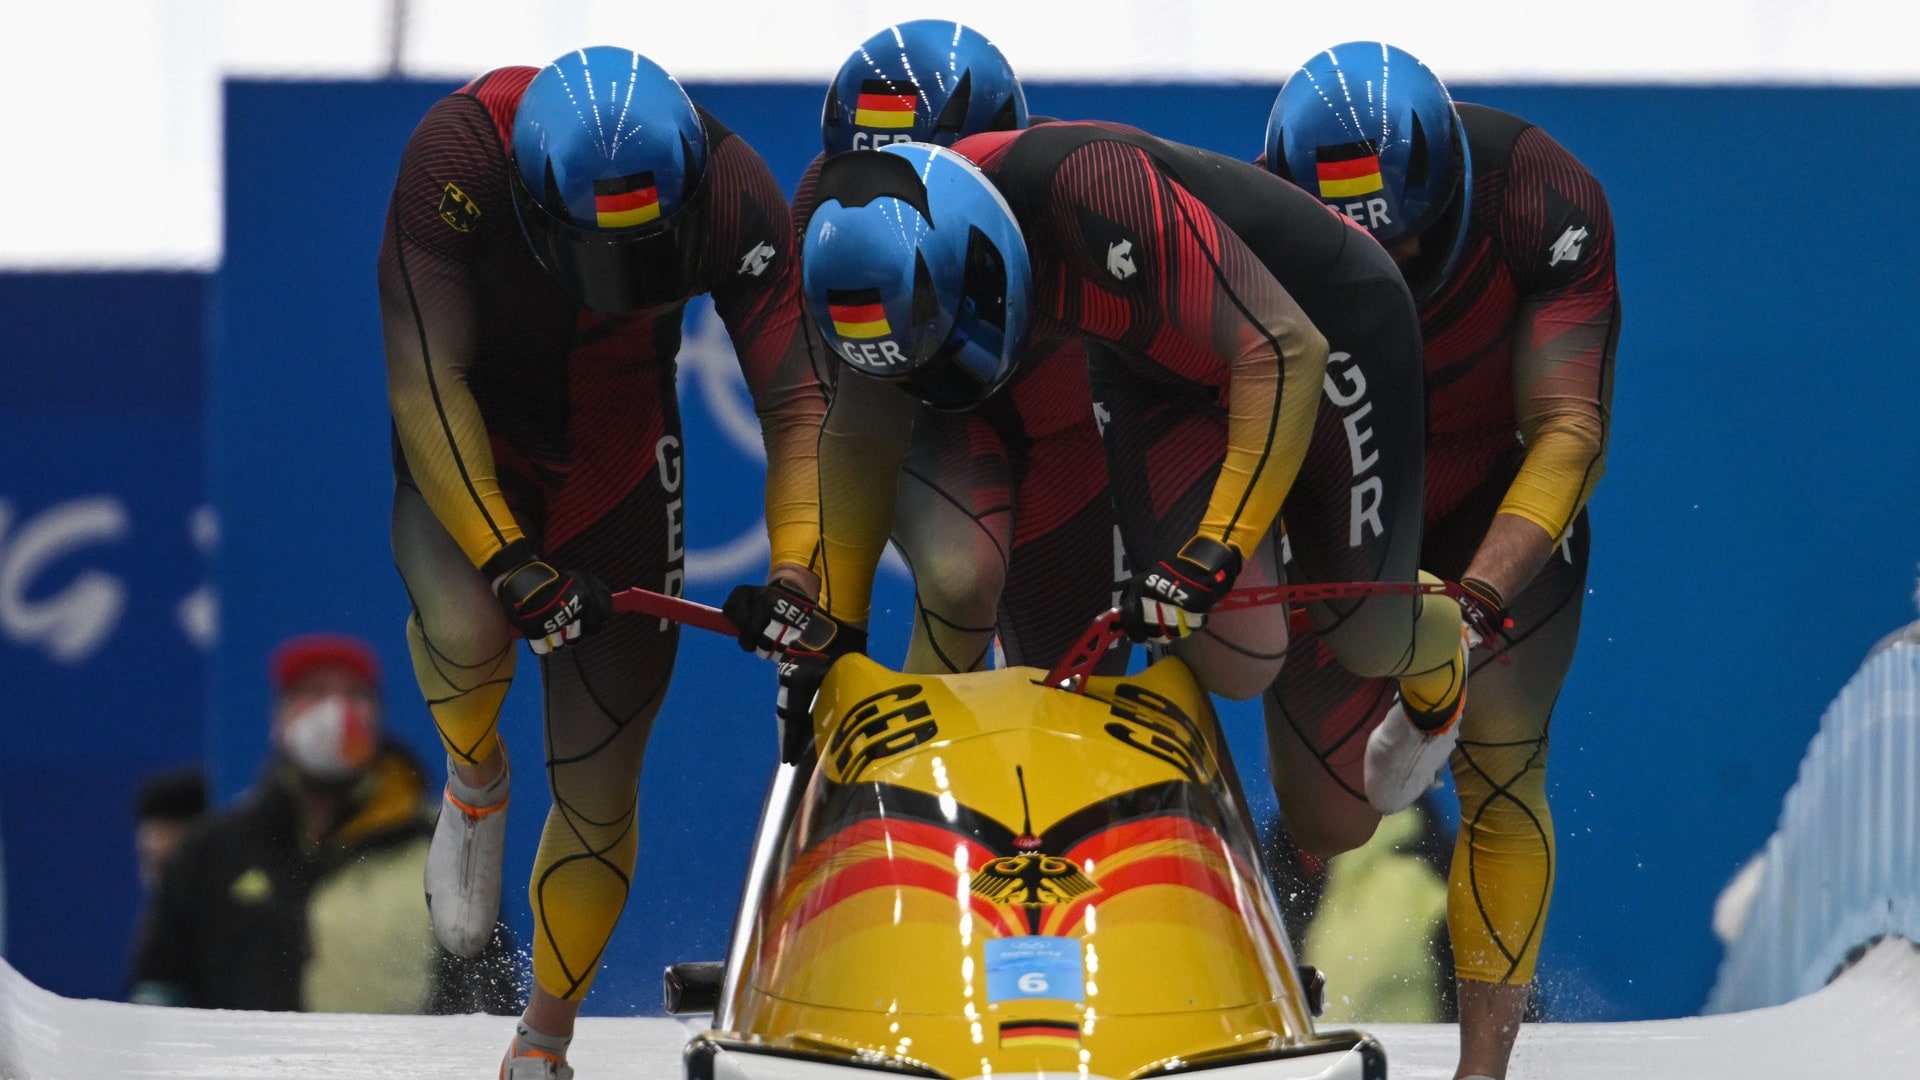 Germans hold top-two spots midway through four-man bobsled